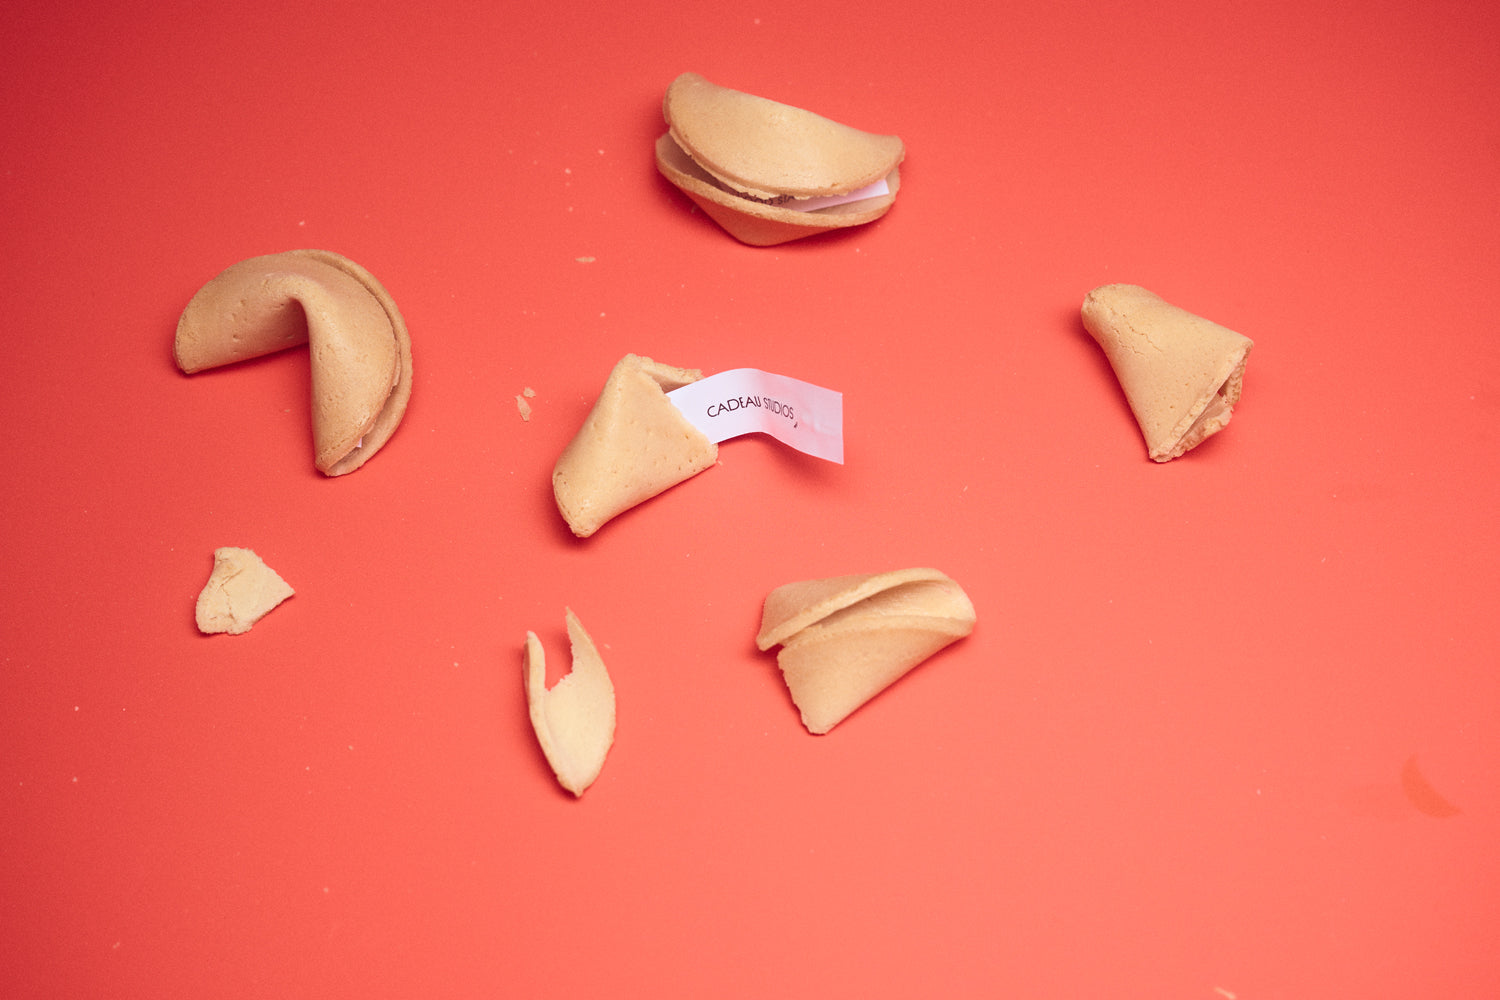 Fortune cookies scattered